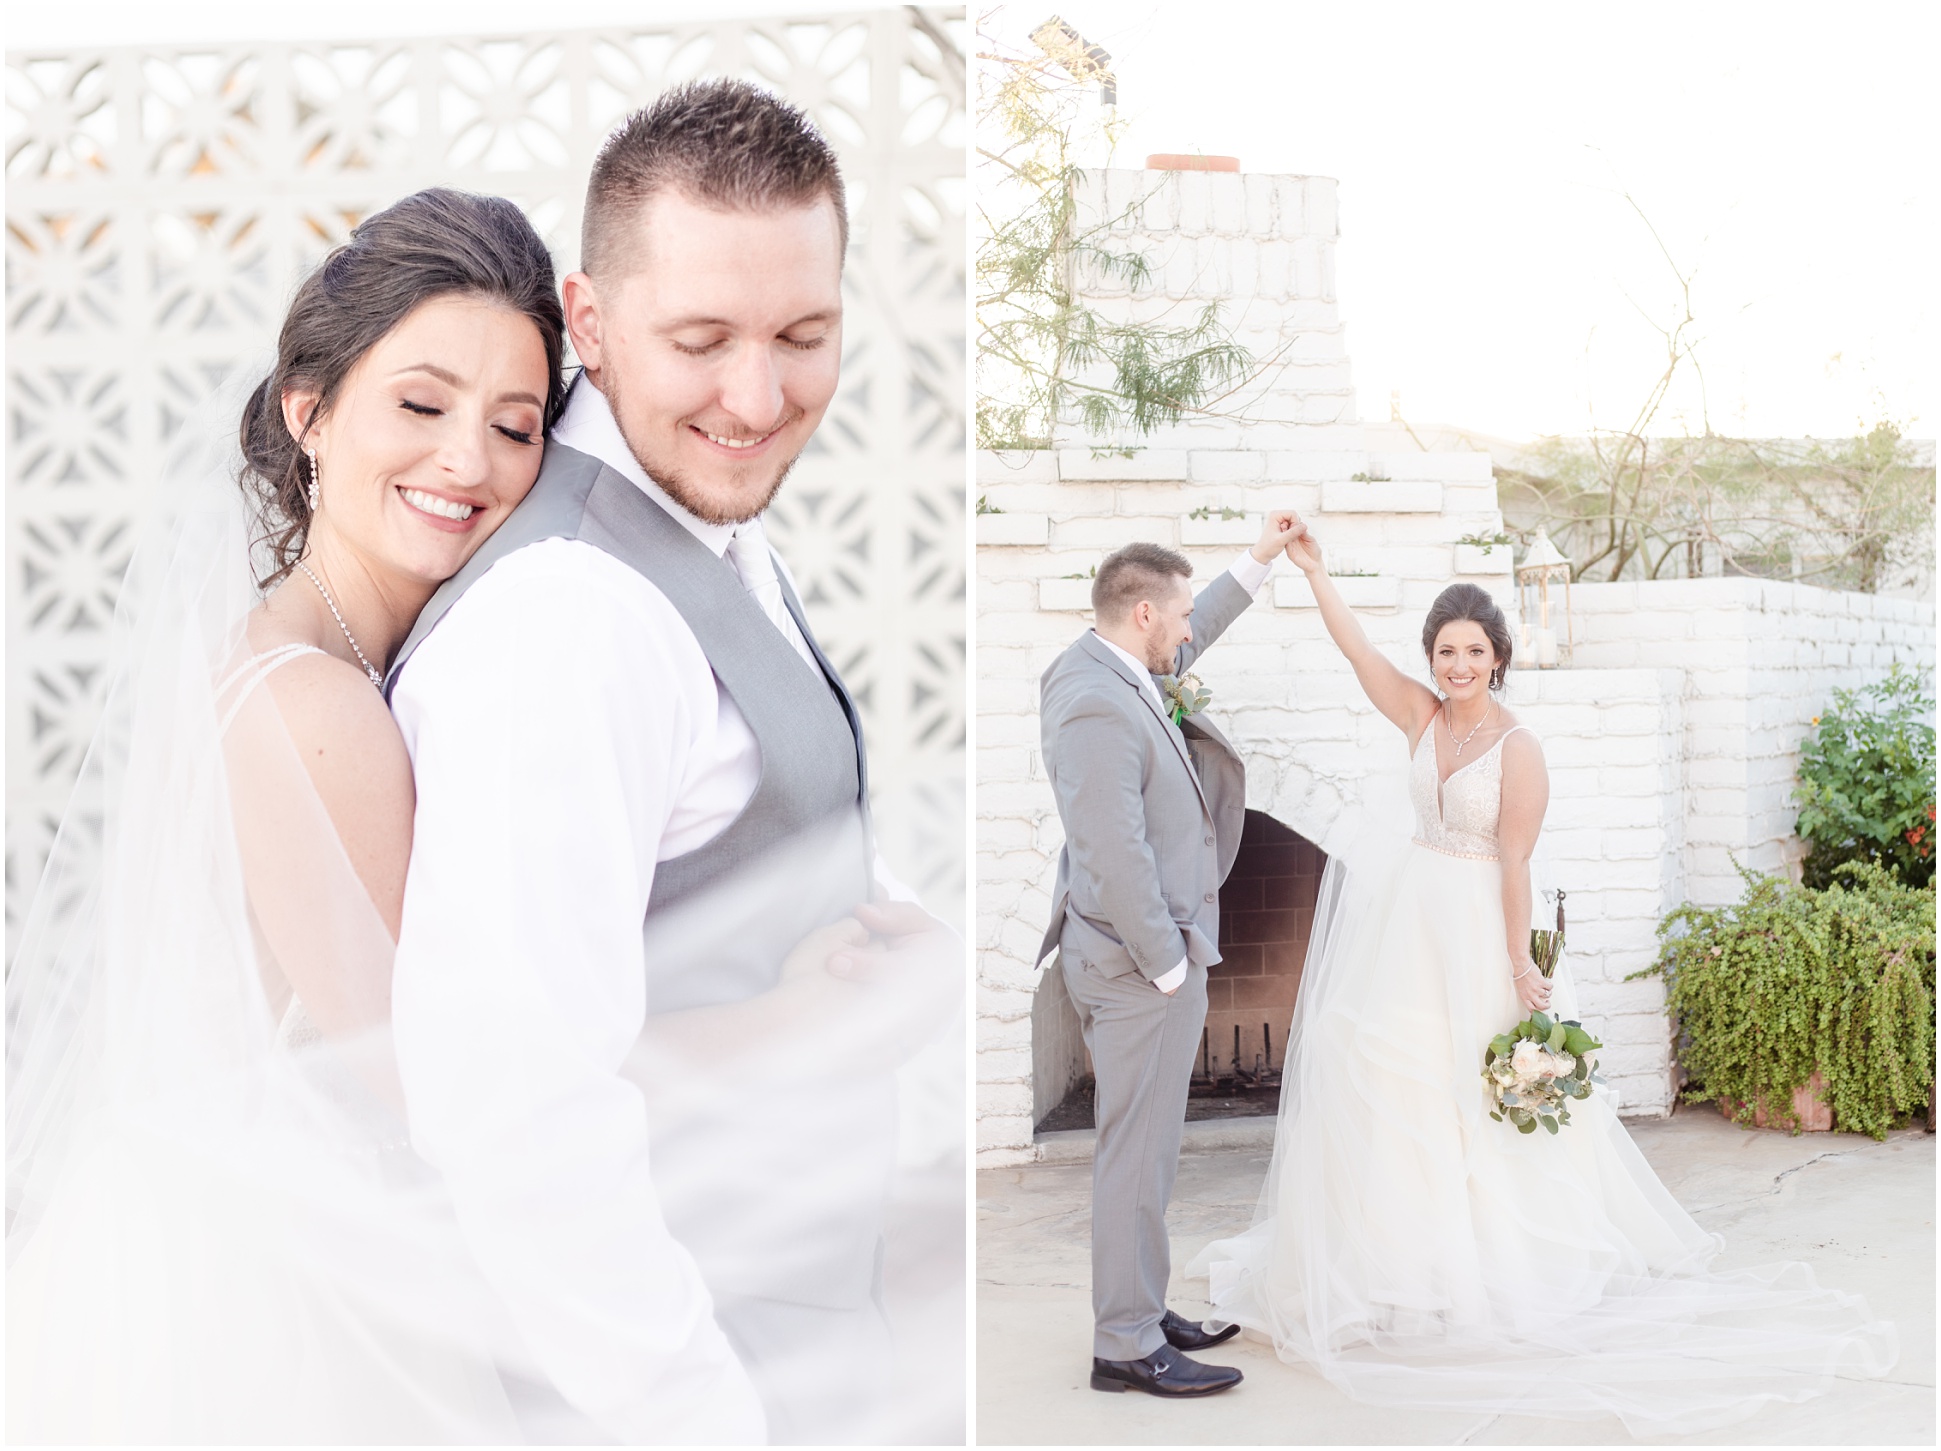 bride snuggling groom from behind while both smile; groom twirling bride while holding bouquet